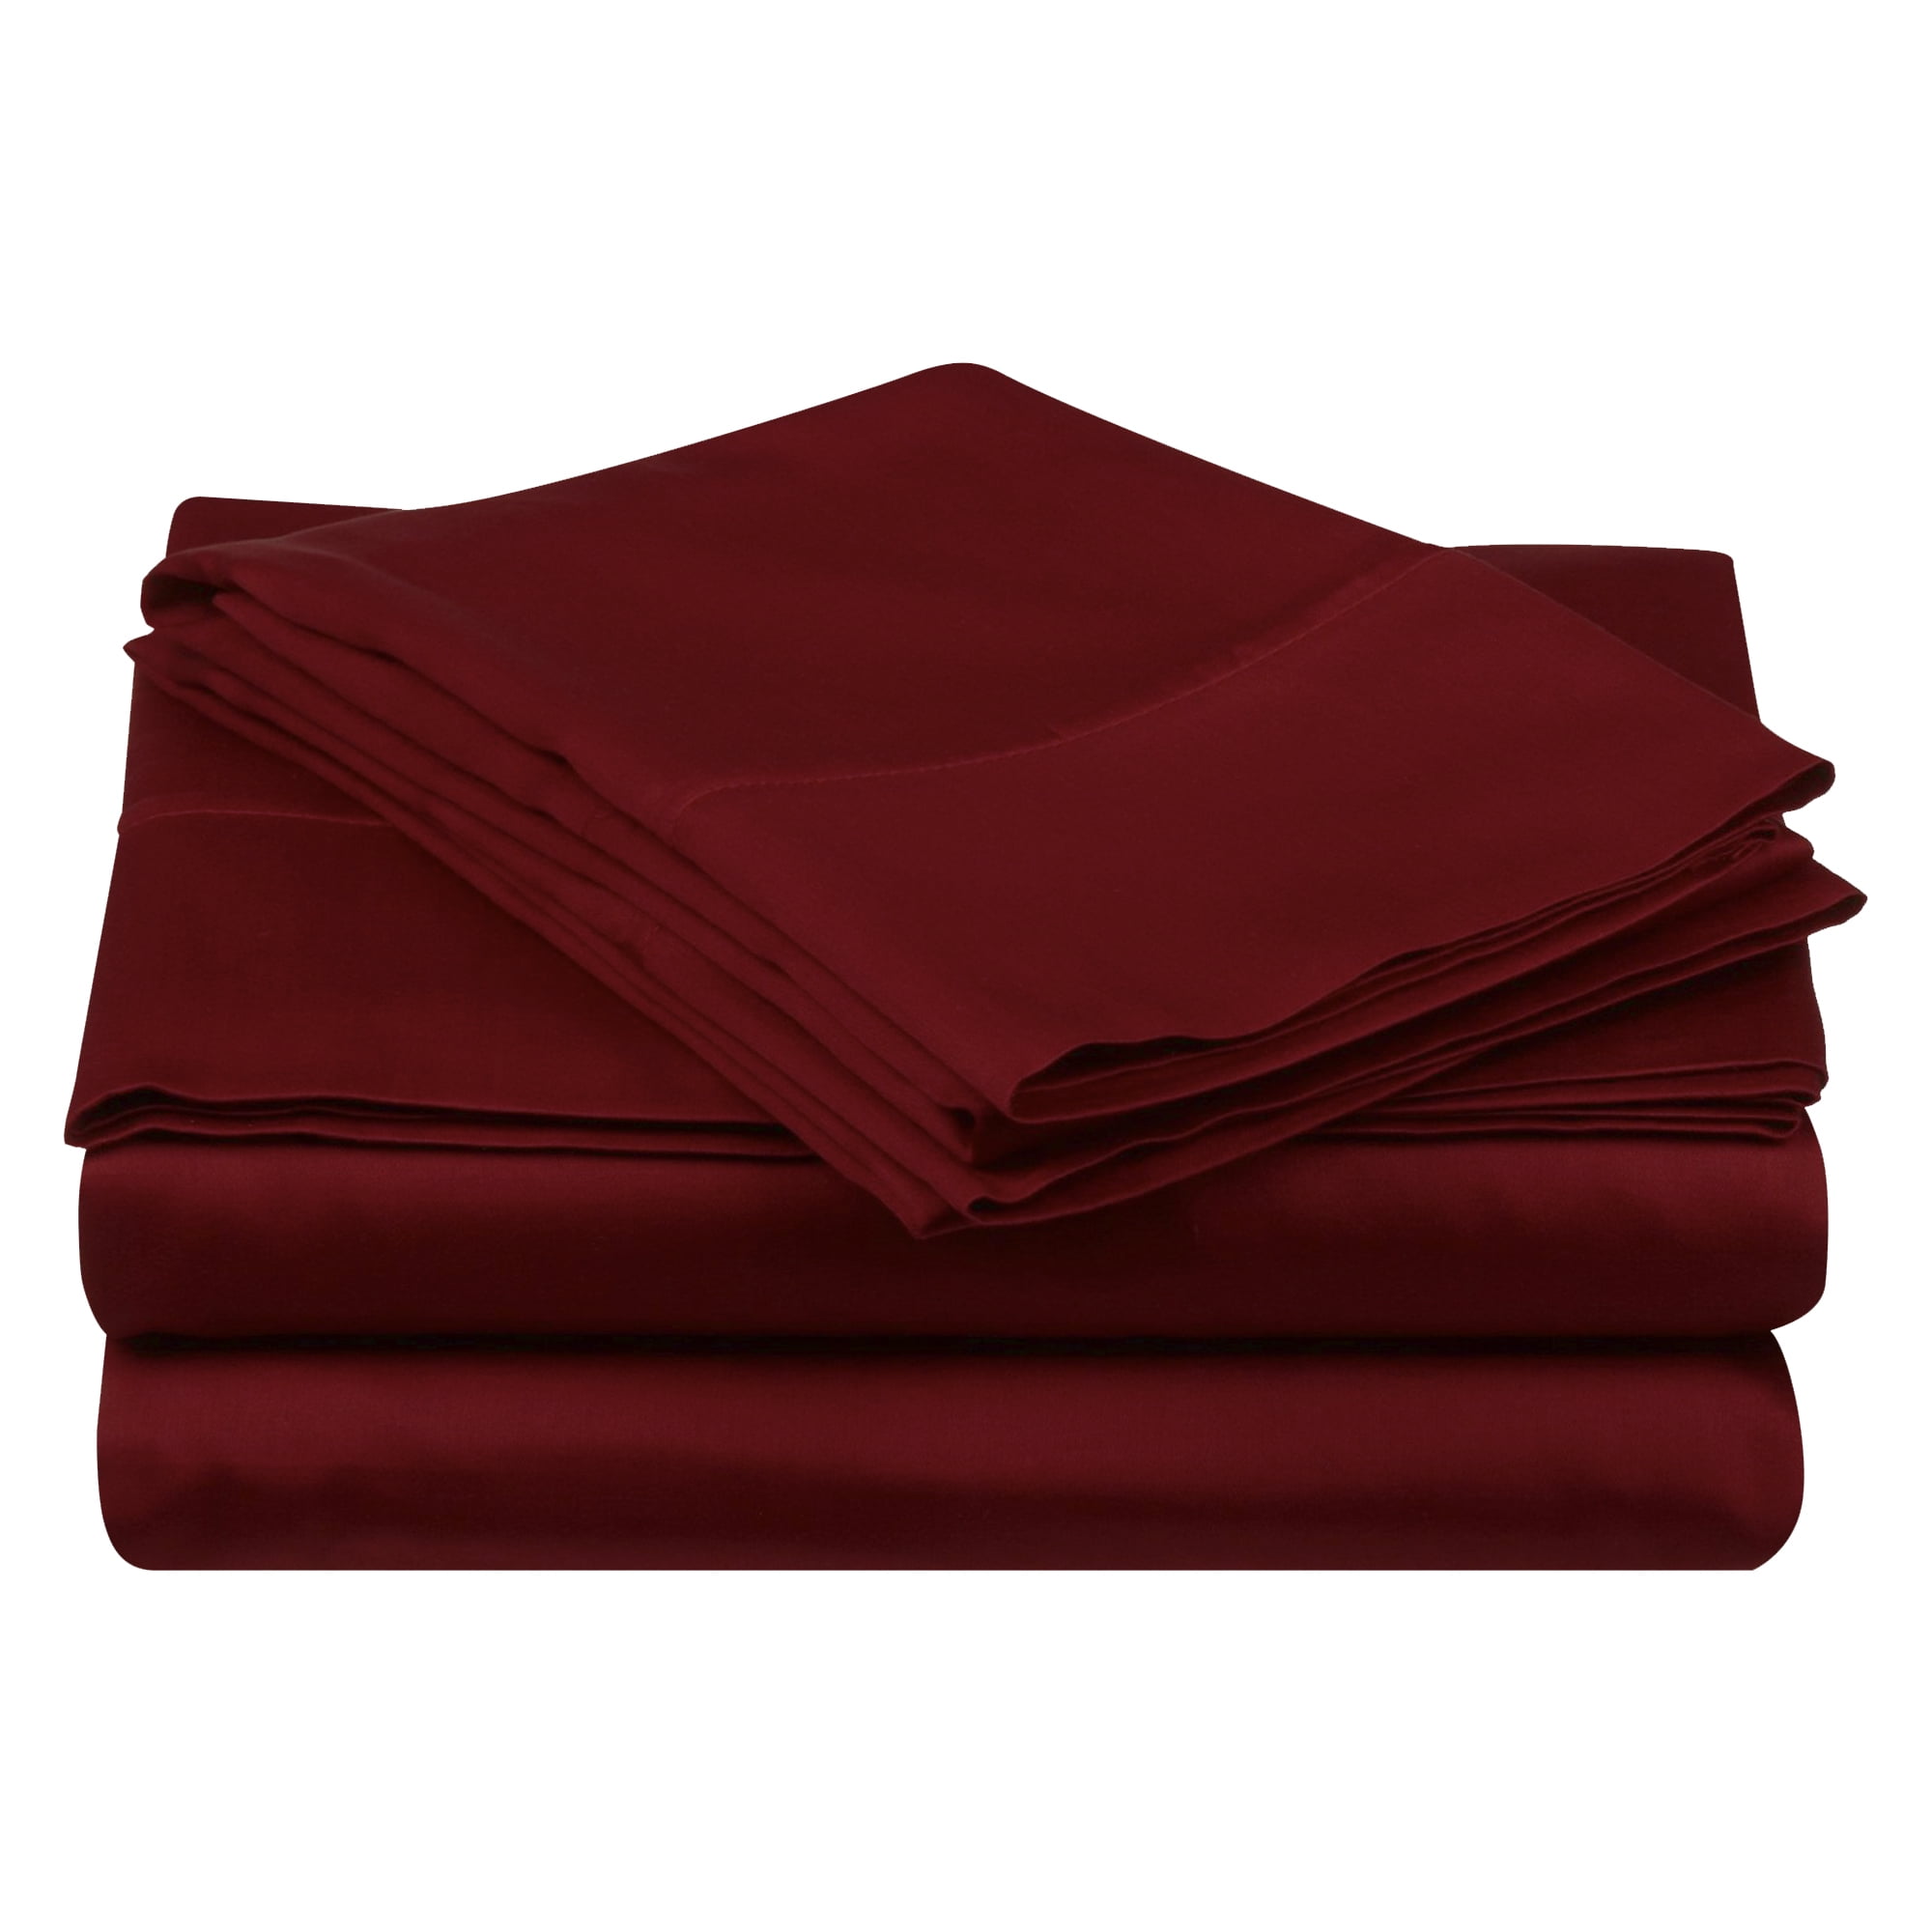 400-Thread Count 100% Egyptian Cotton Bedding Sheets & Pillowcases, 4-Piece  Sheet Set by Impressions -Queen